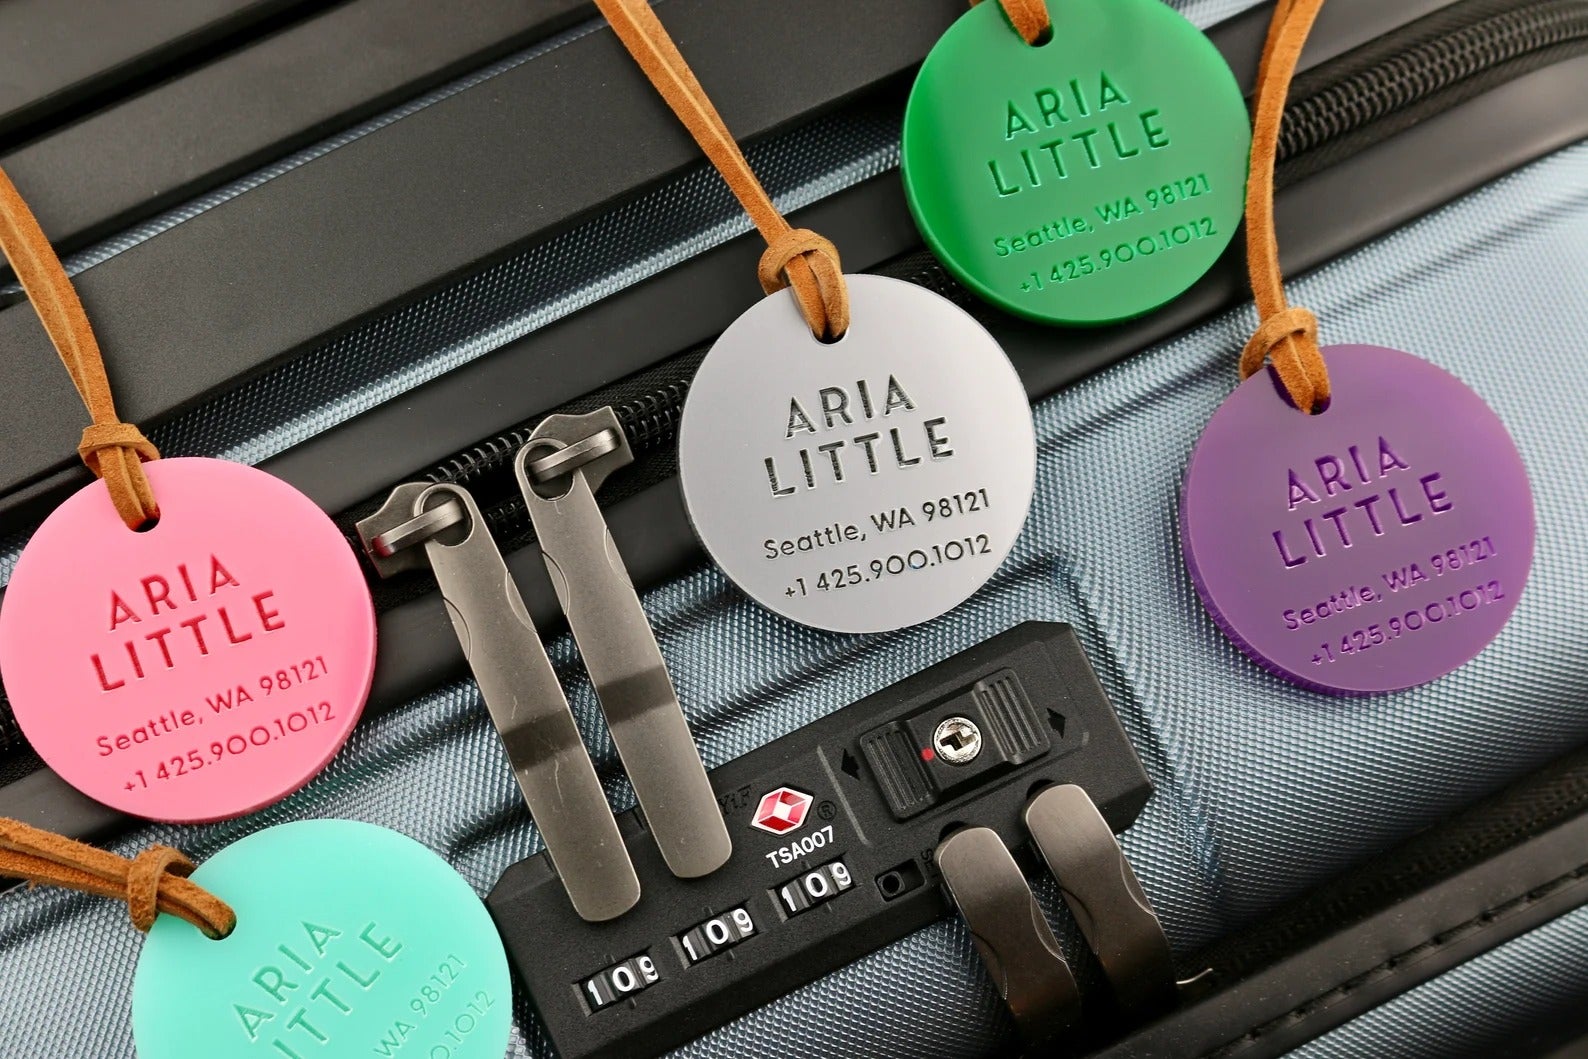 Assorted round personalized luggage tags in different colors on a suitcase